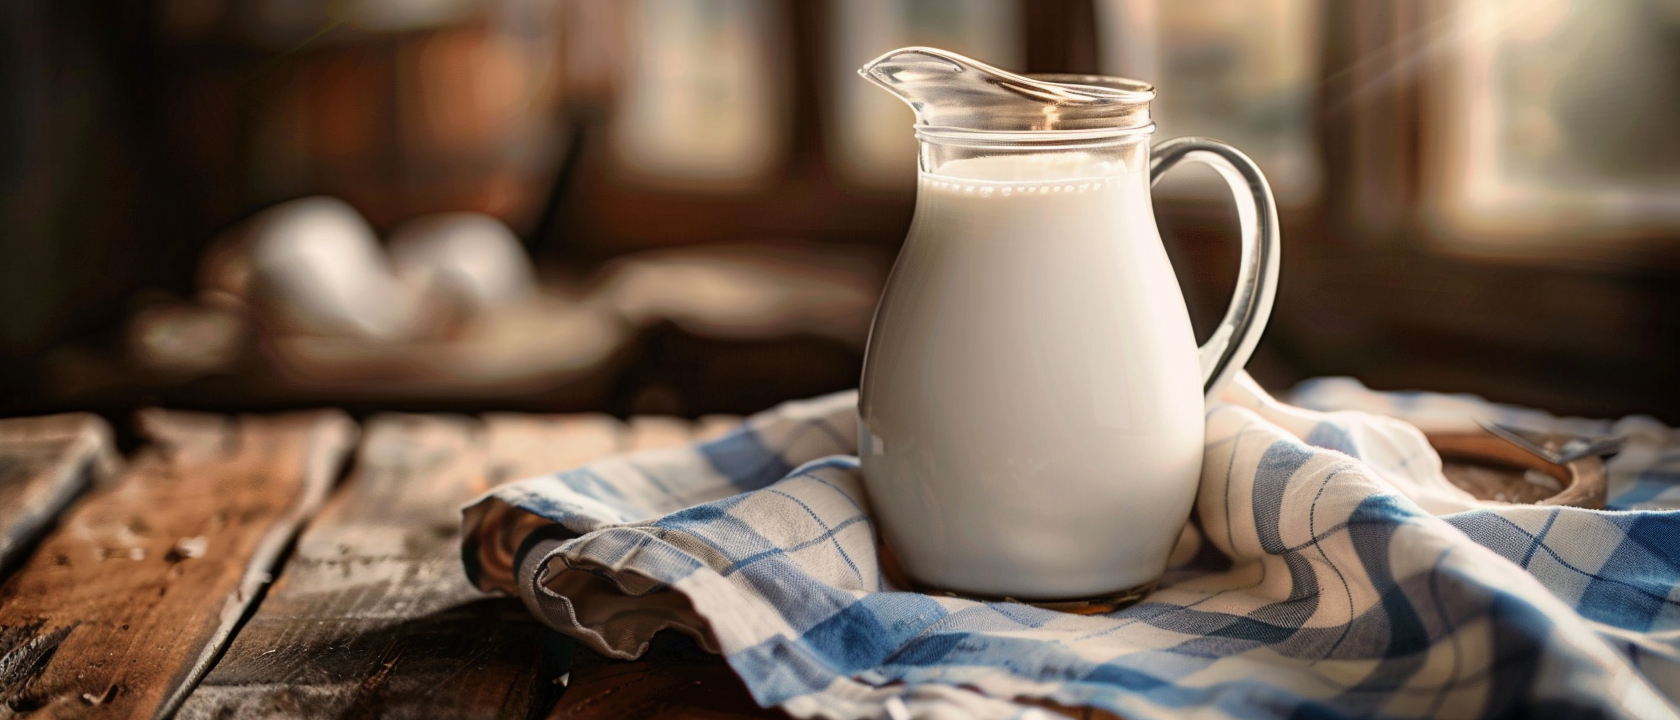 The Benefits of Raw Milk Explained